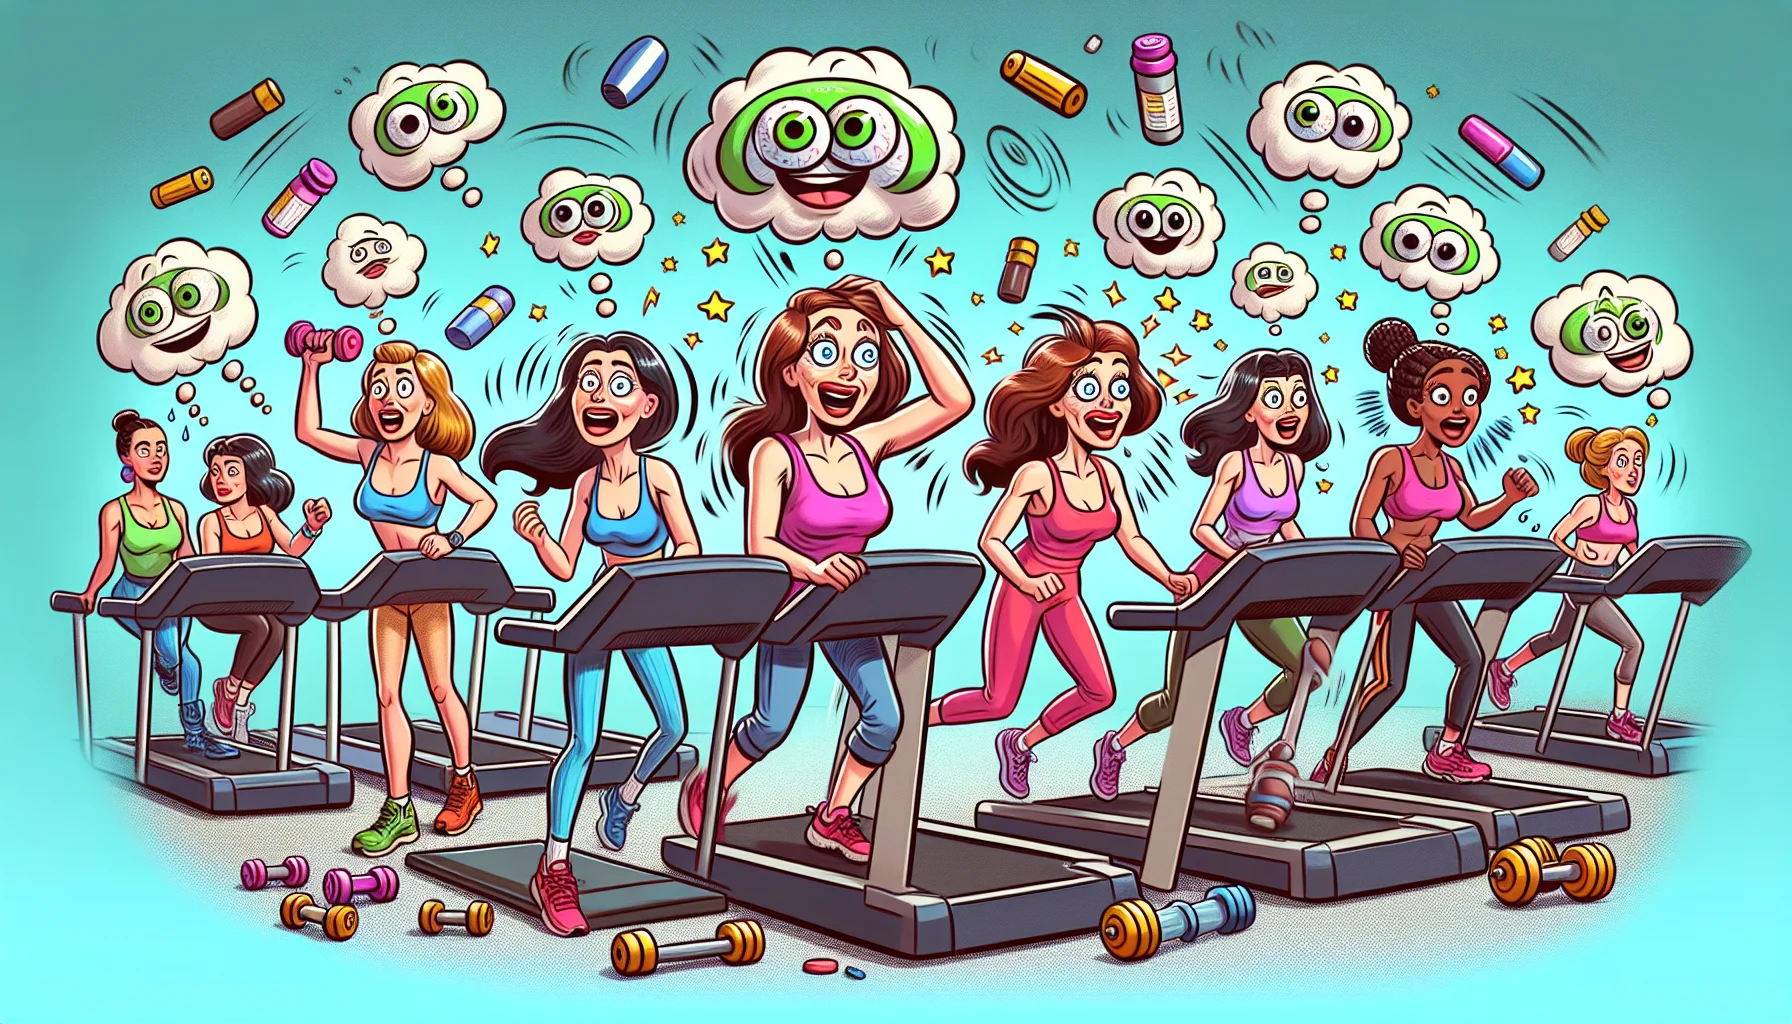 Create a humorous and realistic illustration that conceptually expresses the side effects of Adderall in women regarding fitness. Picture a gym atmosphere with fitness equipment - treadmills, dumbbells, yoga mats. Also, envision women of various ages with various descents such as Hispanic, Caucasian, Middle-Eastern, and South-Asian. Each one of them is engaging in different fitness activities, each with an exaggerated expression highlighting Adderall's side-effects in a comical manner. There is a humorous cartoonish aura hovering over the scene - a nimbus of tossed-about feathers, cartoon stars, or spiraling eyes; something to inject light humour to an otherwise serious topic.